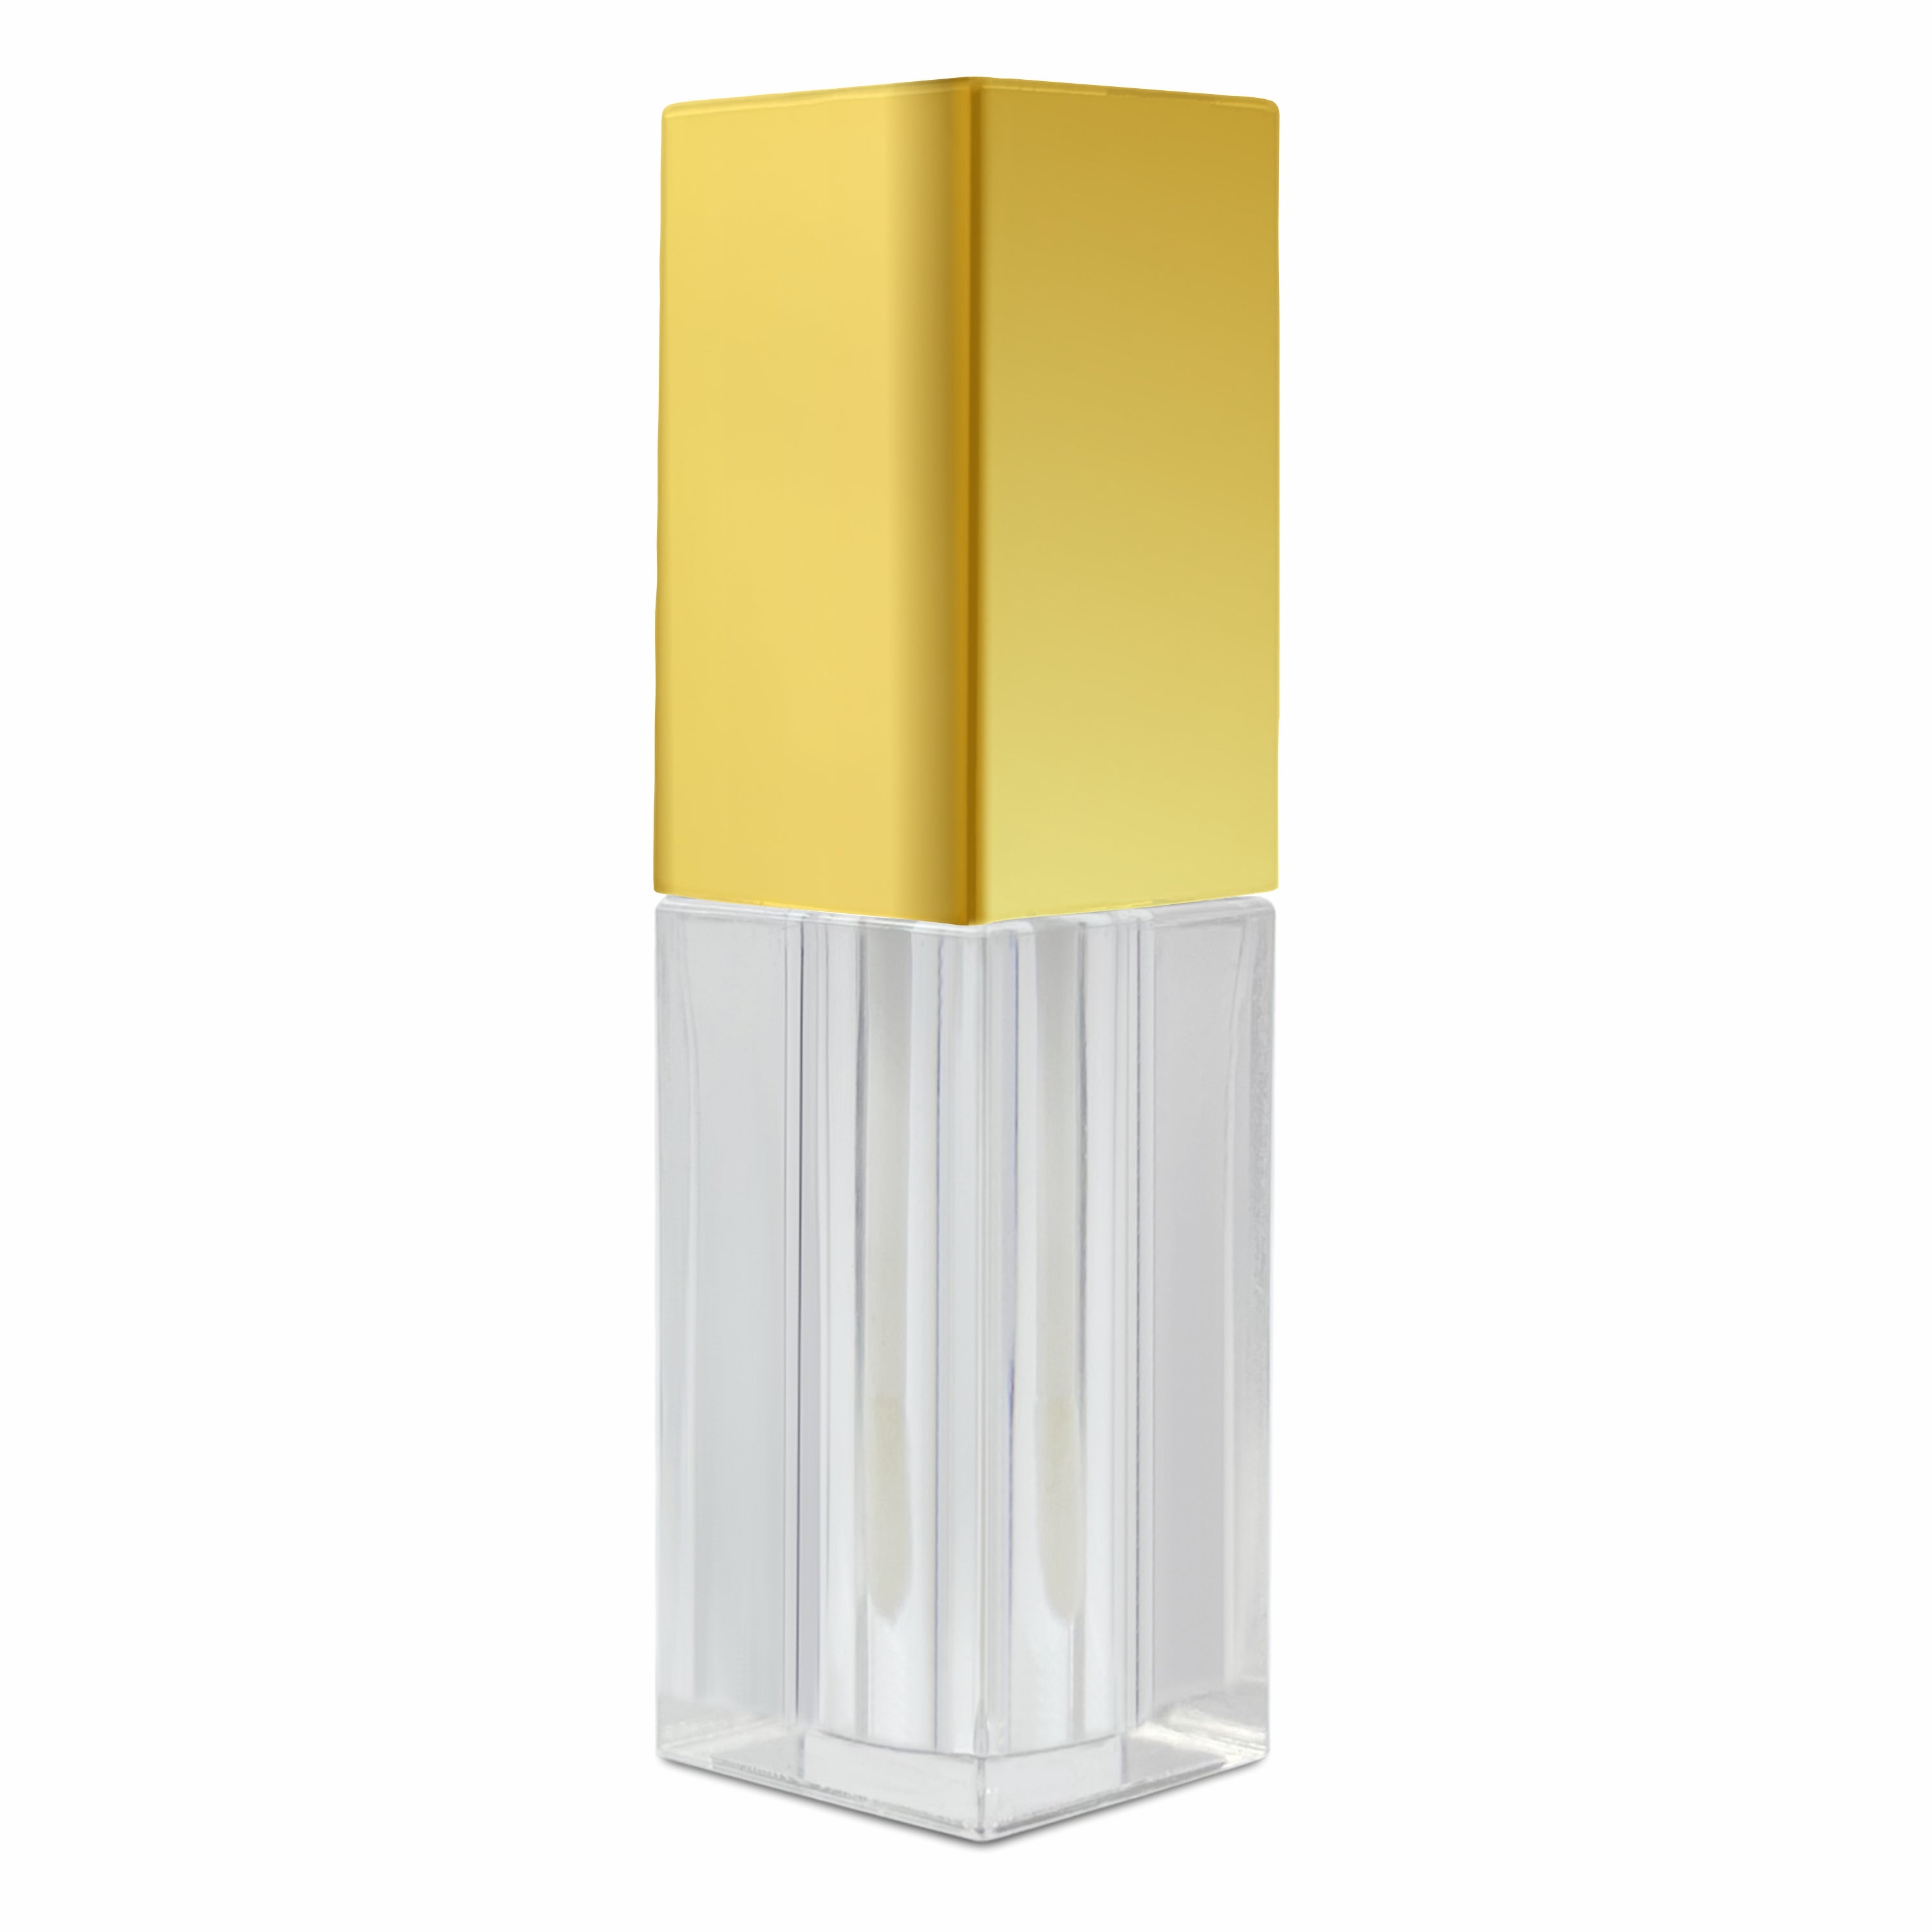 Lip Gloss/ Lip Stick Tube Square Shaped Bottle with Gold Plated Square Cap- 5ml [ZMG79]